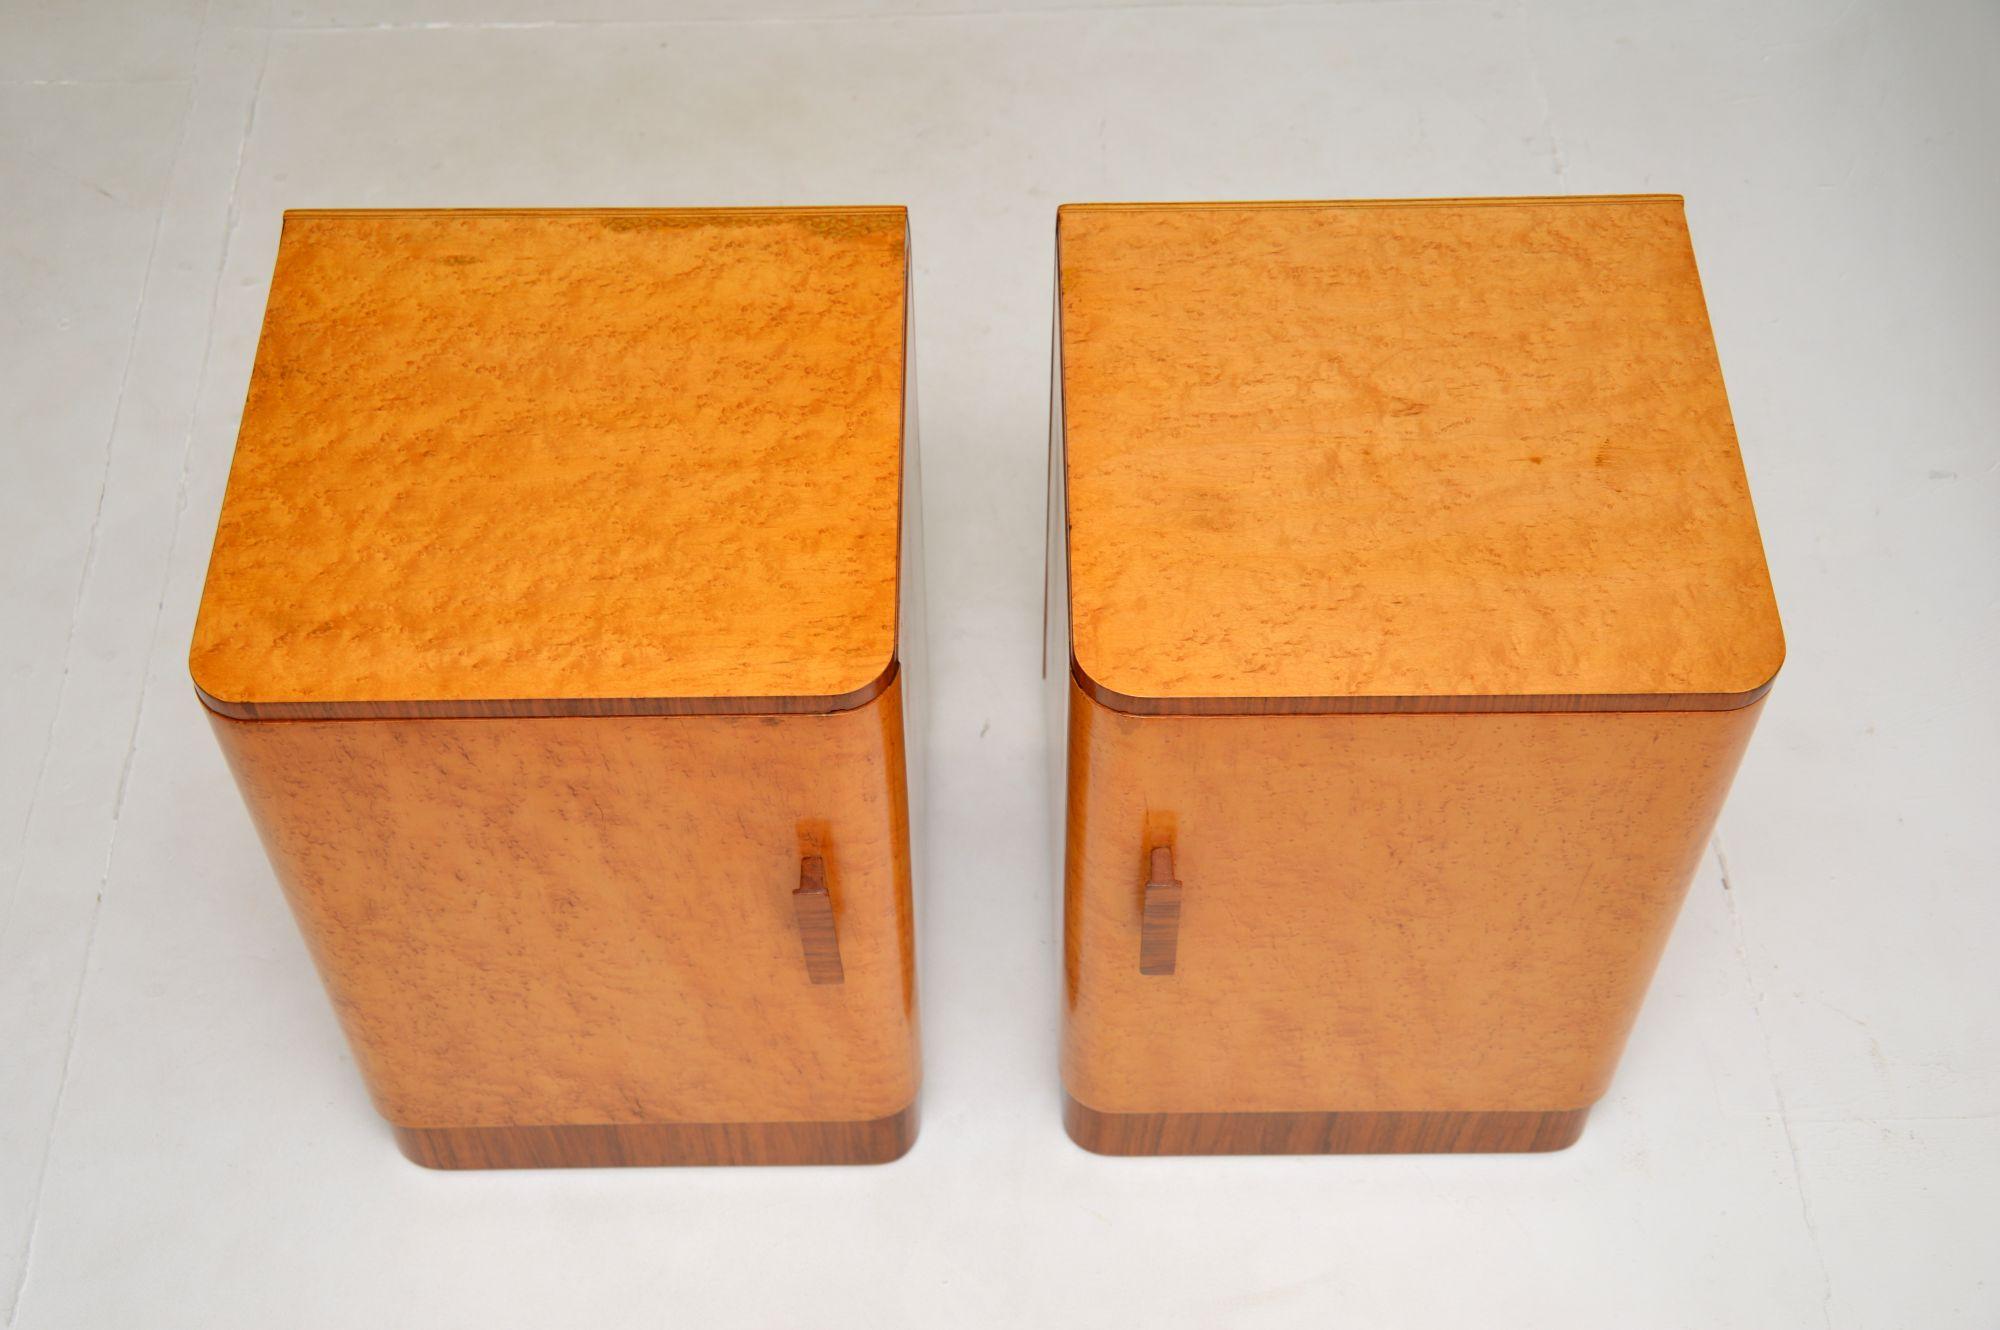 Early 20th Century Pair of Art Deco Bedside Cabinets in Birds Eye Maple and Walnut